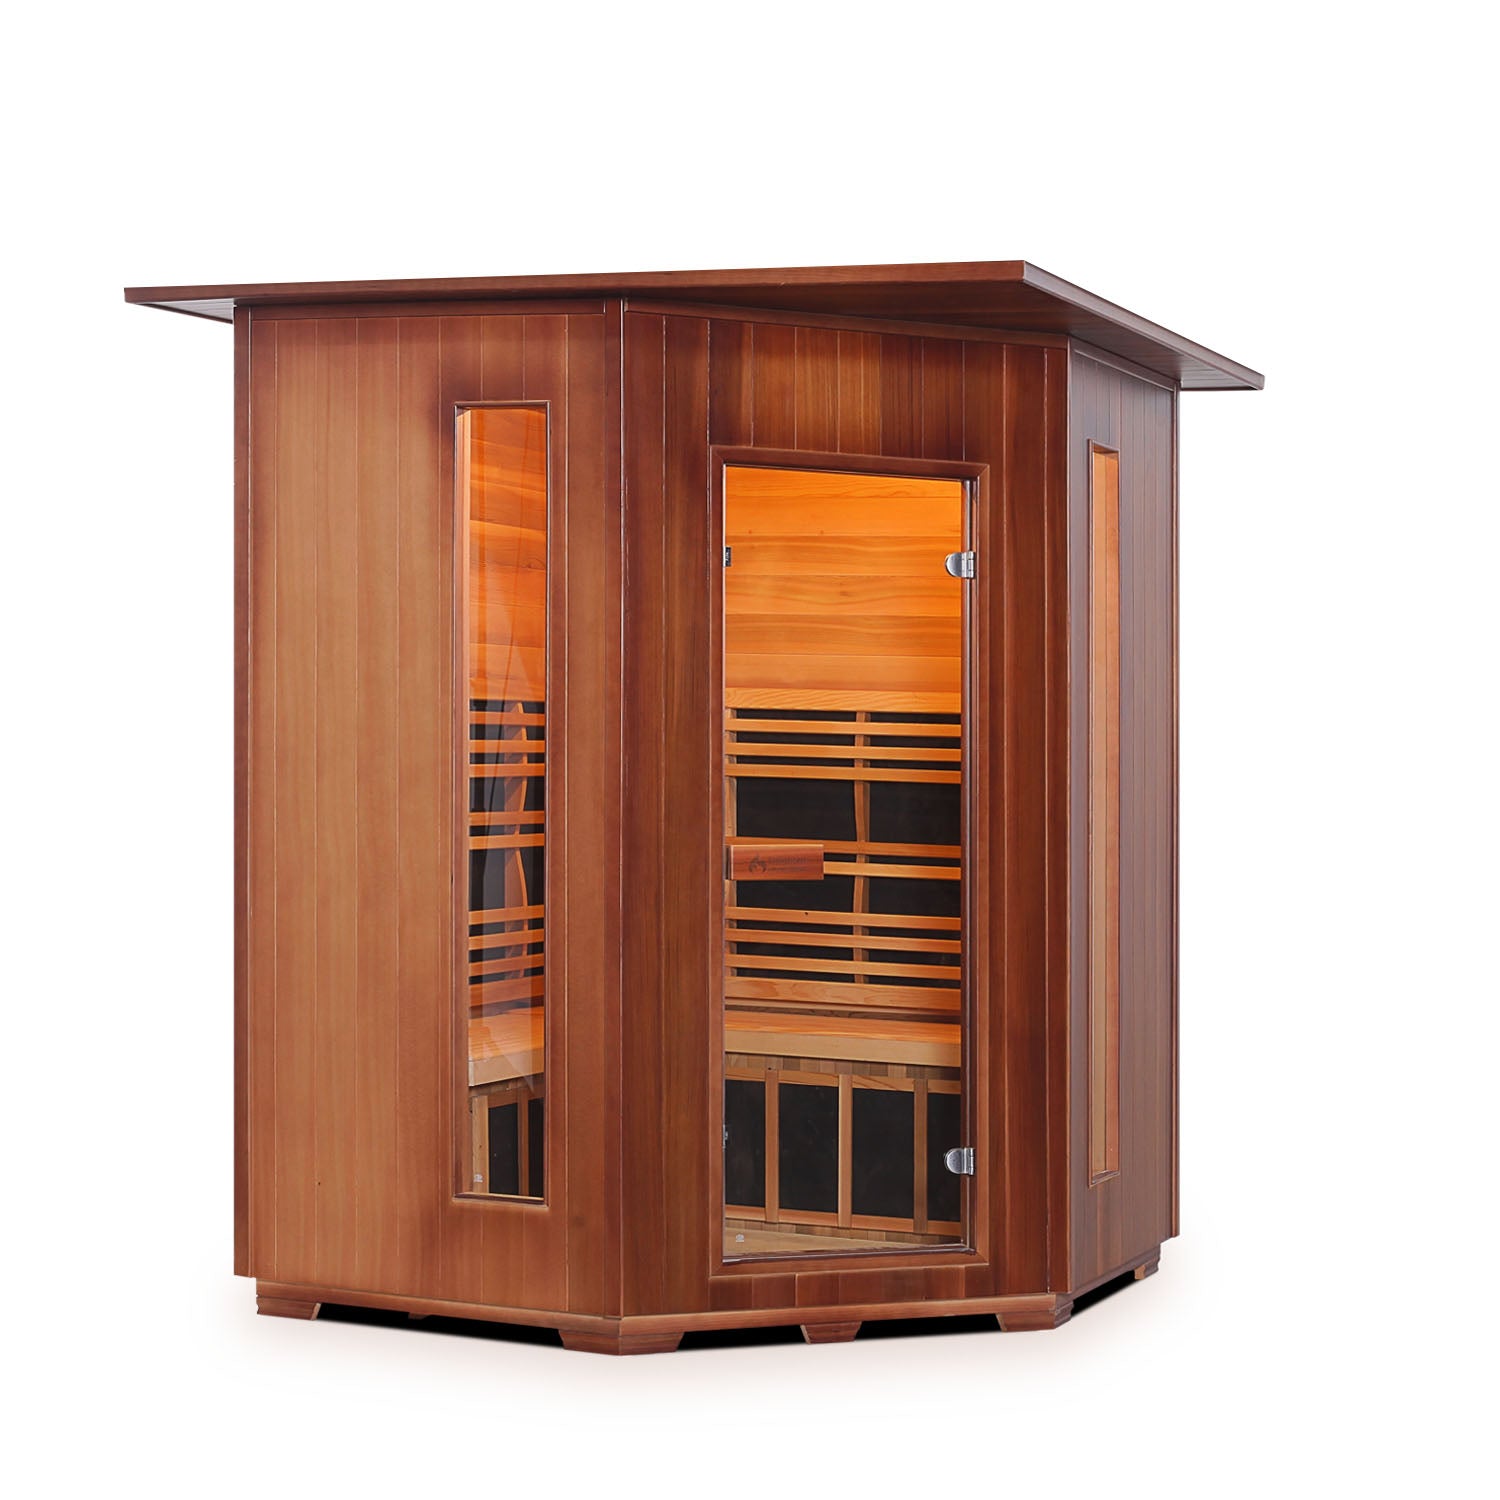 InfraNature Original Rustic Infrared Sauna Canadian Red Cedar Wood Outside And Inside with indoor roof and glass door and windows